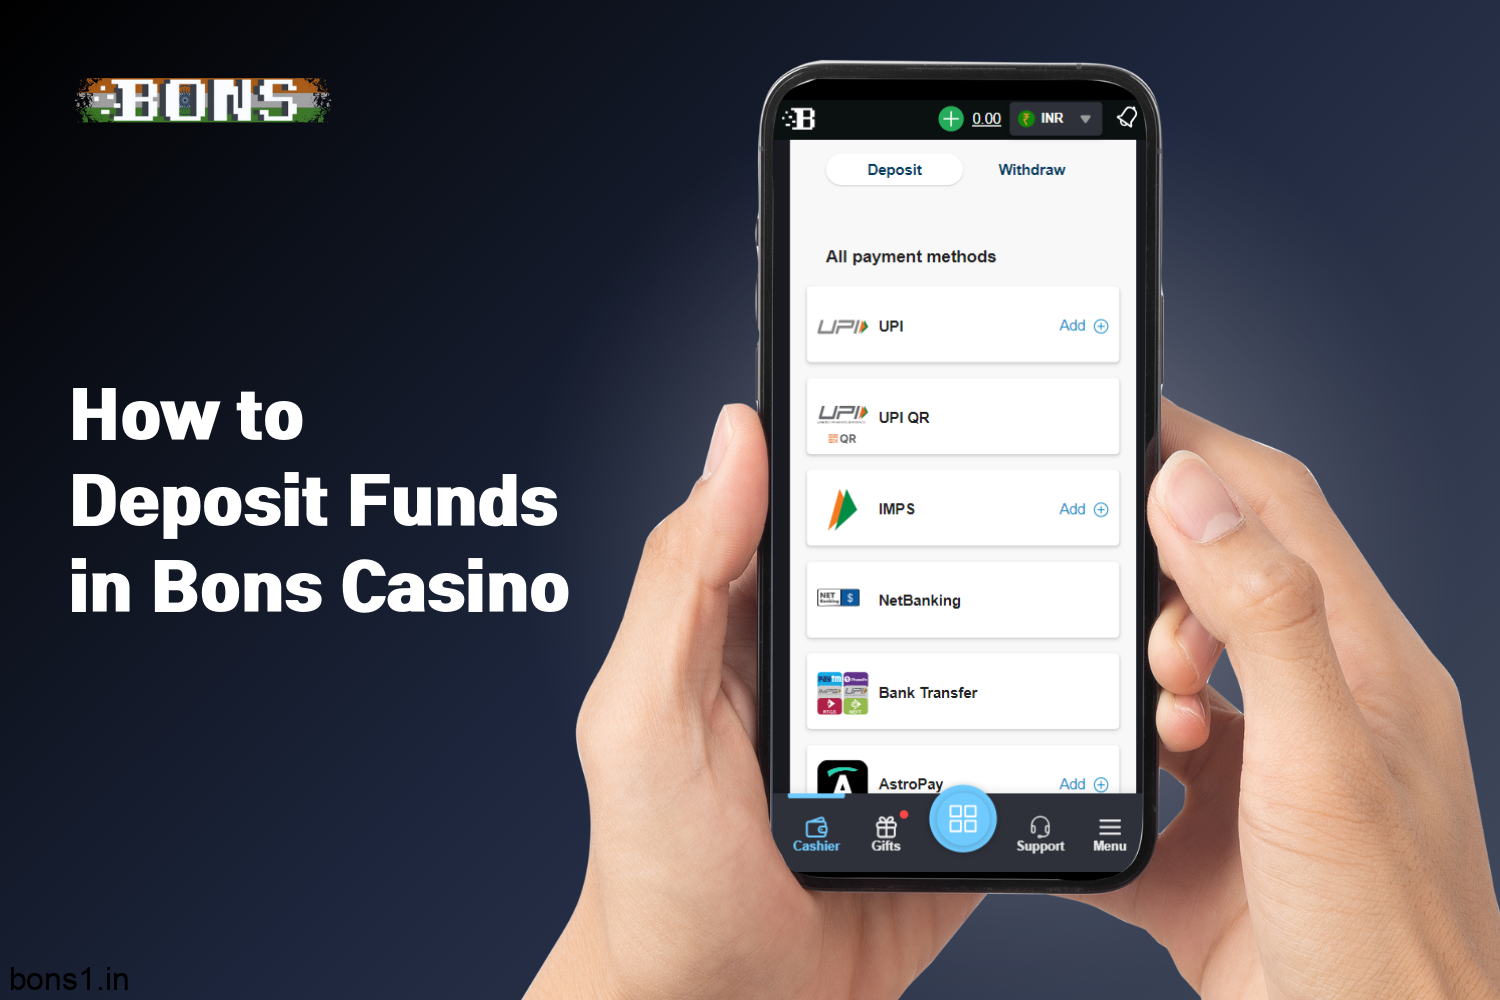 To deposit funds to bons casino, users from India need to go to the appropriate section in their personal account